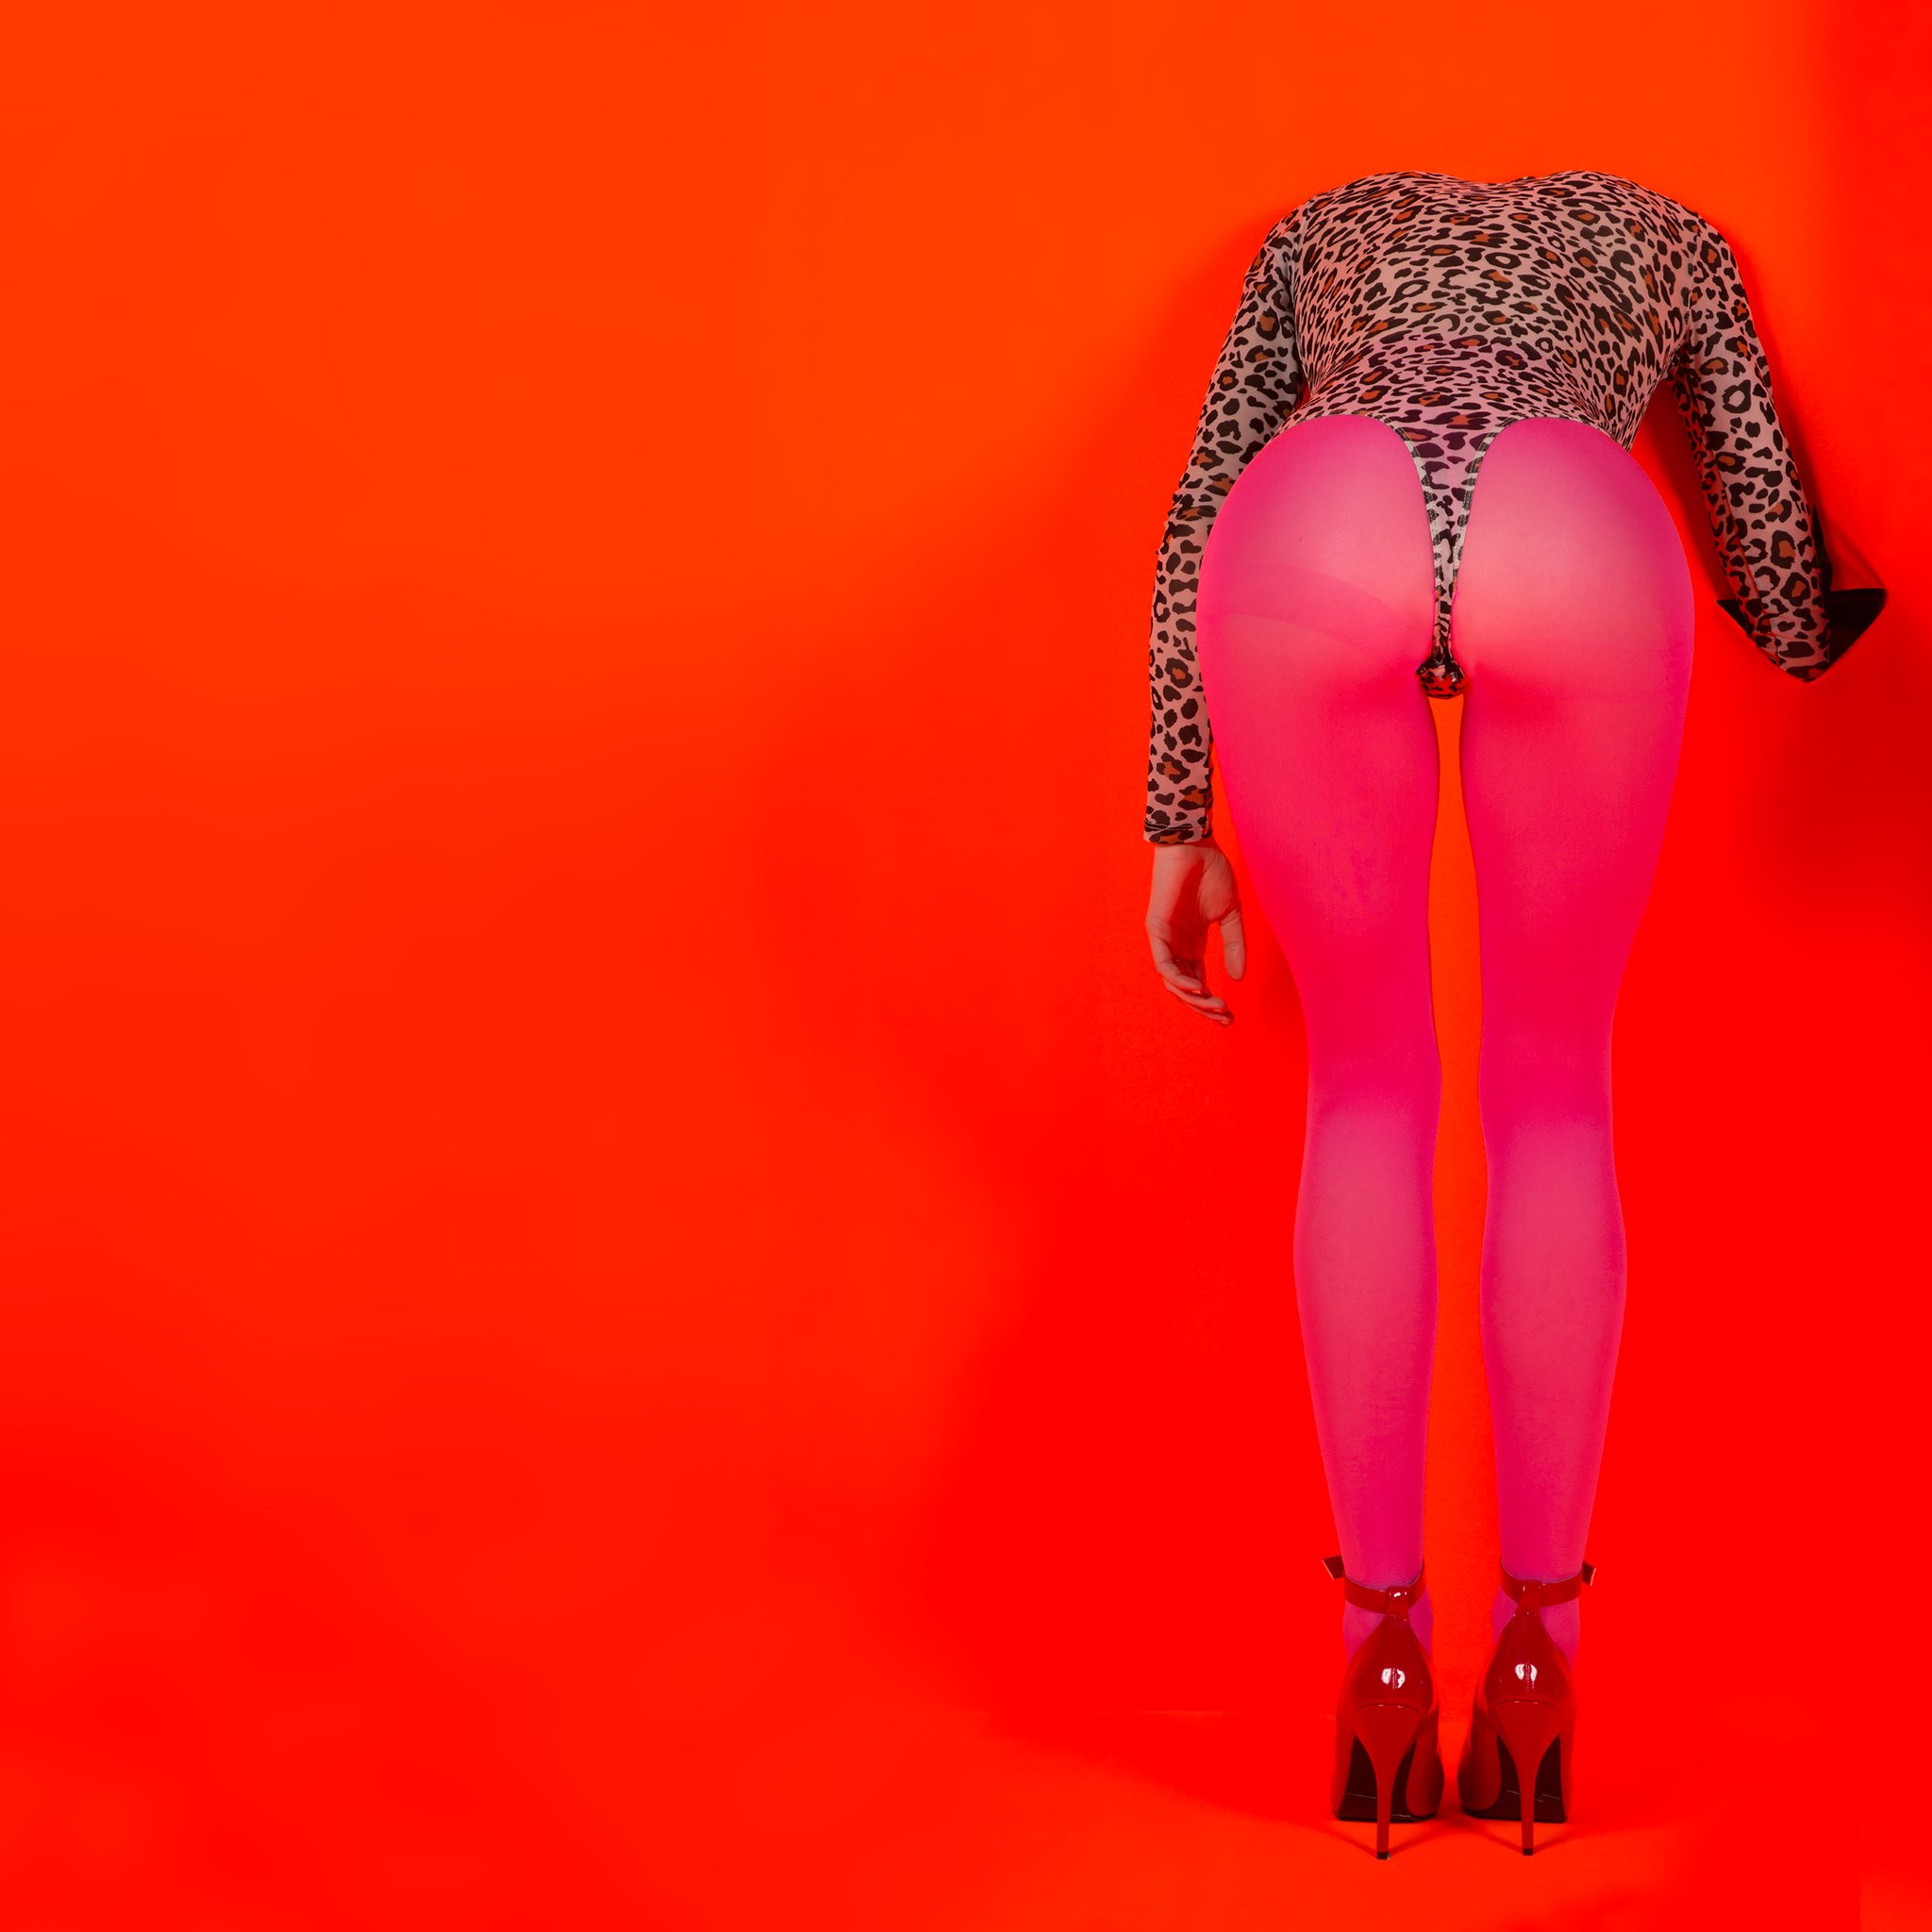 St. Vincent Announces New Album <i></noscript>MASSEDUCTION</i>, Releases “Los Ageless”” title=”st.-vincent-1504705703″ data-original-id=”256714″ data-adjusted-id=”256714″ class=”sm_size_full_width sm_alignment_center ” data-image-source=”free_stock” />
<p><strong>St. Vincent<em>, MASSEDUCTION </em>track list<br />
</strong>1. “Hang on Me”<br />
2. “Pills”<br />
3. “Masseduction”<br />
4. “Sugarboy”<br />
5. “Los Ageless”<br />
6. “Happy Birthday, Johnny”<br />
7. “Savior”<br />
8. “New York”<br />
9. “Fear The Future”<br />
10. “Young Lover”<br />
11. “Dancing with a Ghost”<br />
12. “Slow Disco”<br />
13. “Smoking Section”</p>
</div>
</div>
</div>
</div>
</div>
</section>
<section data-particle_enable=